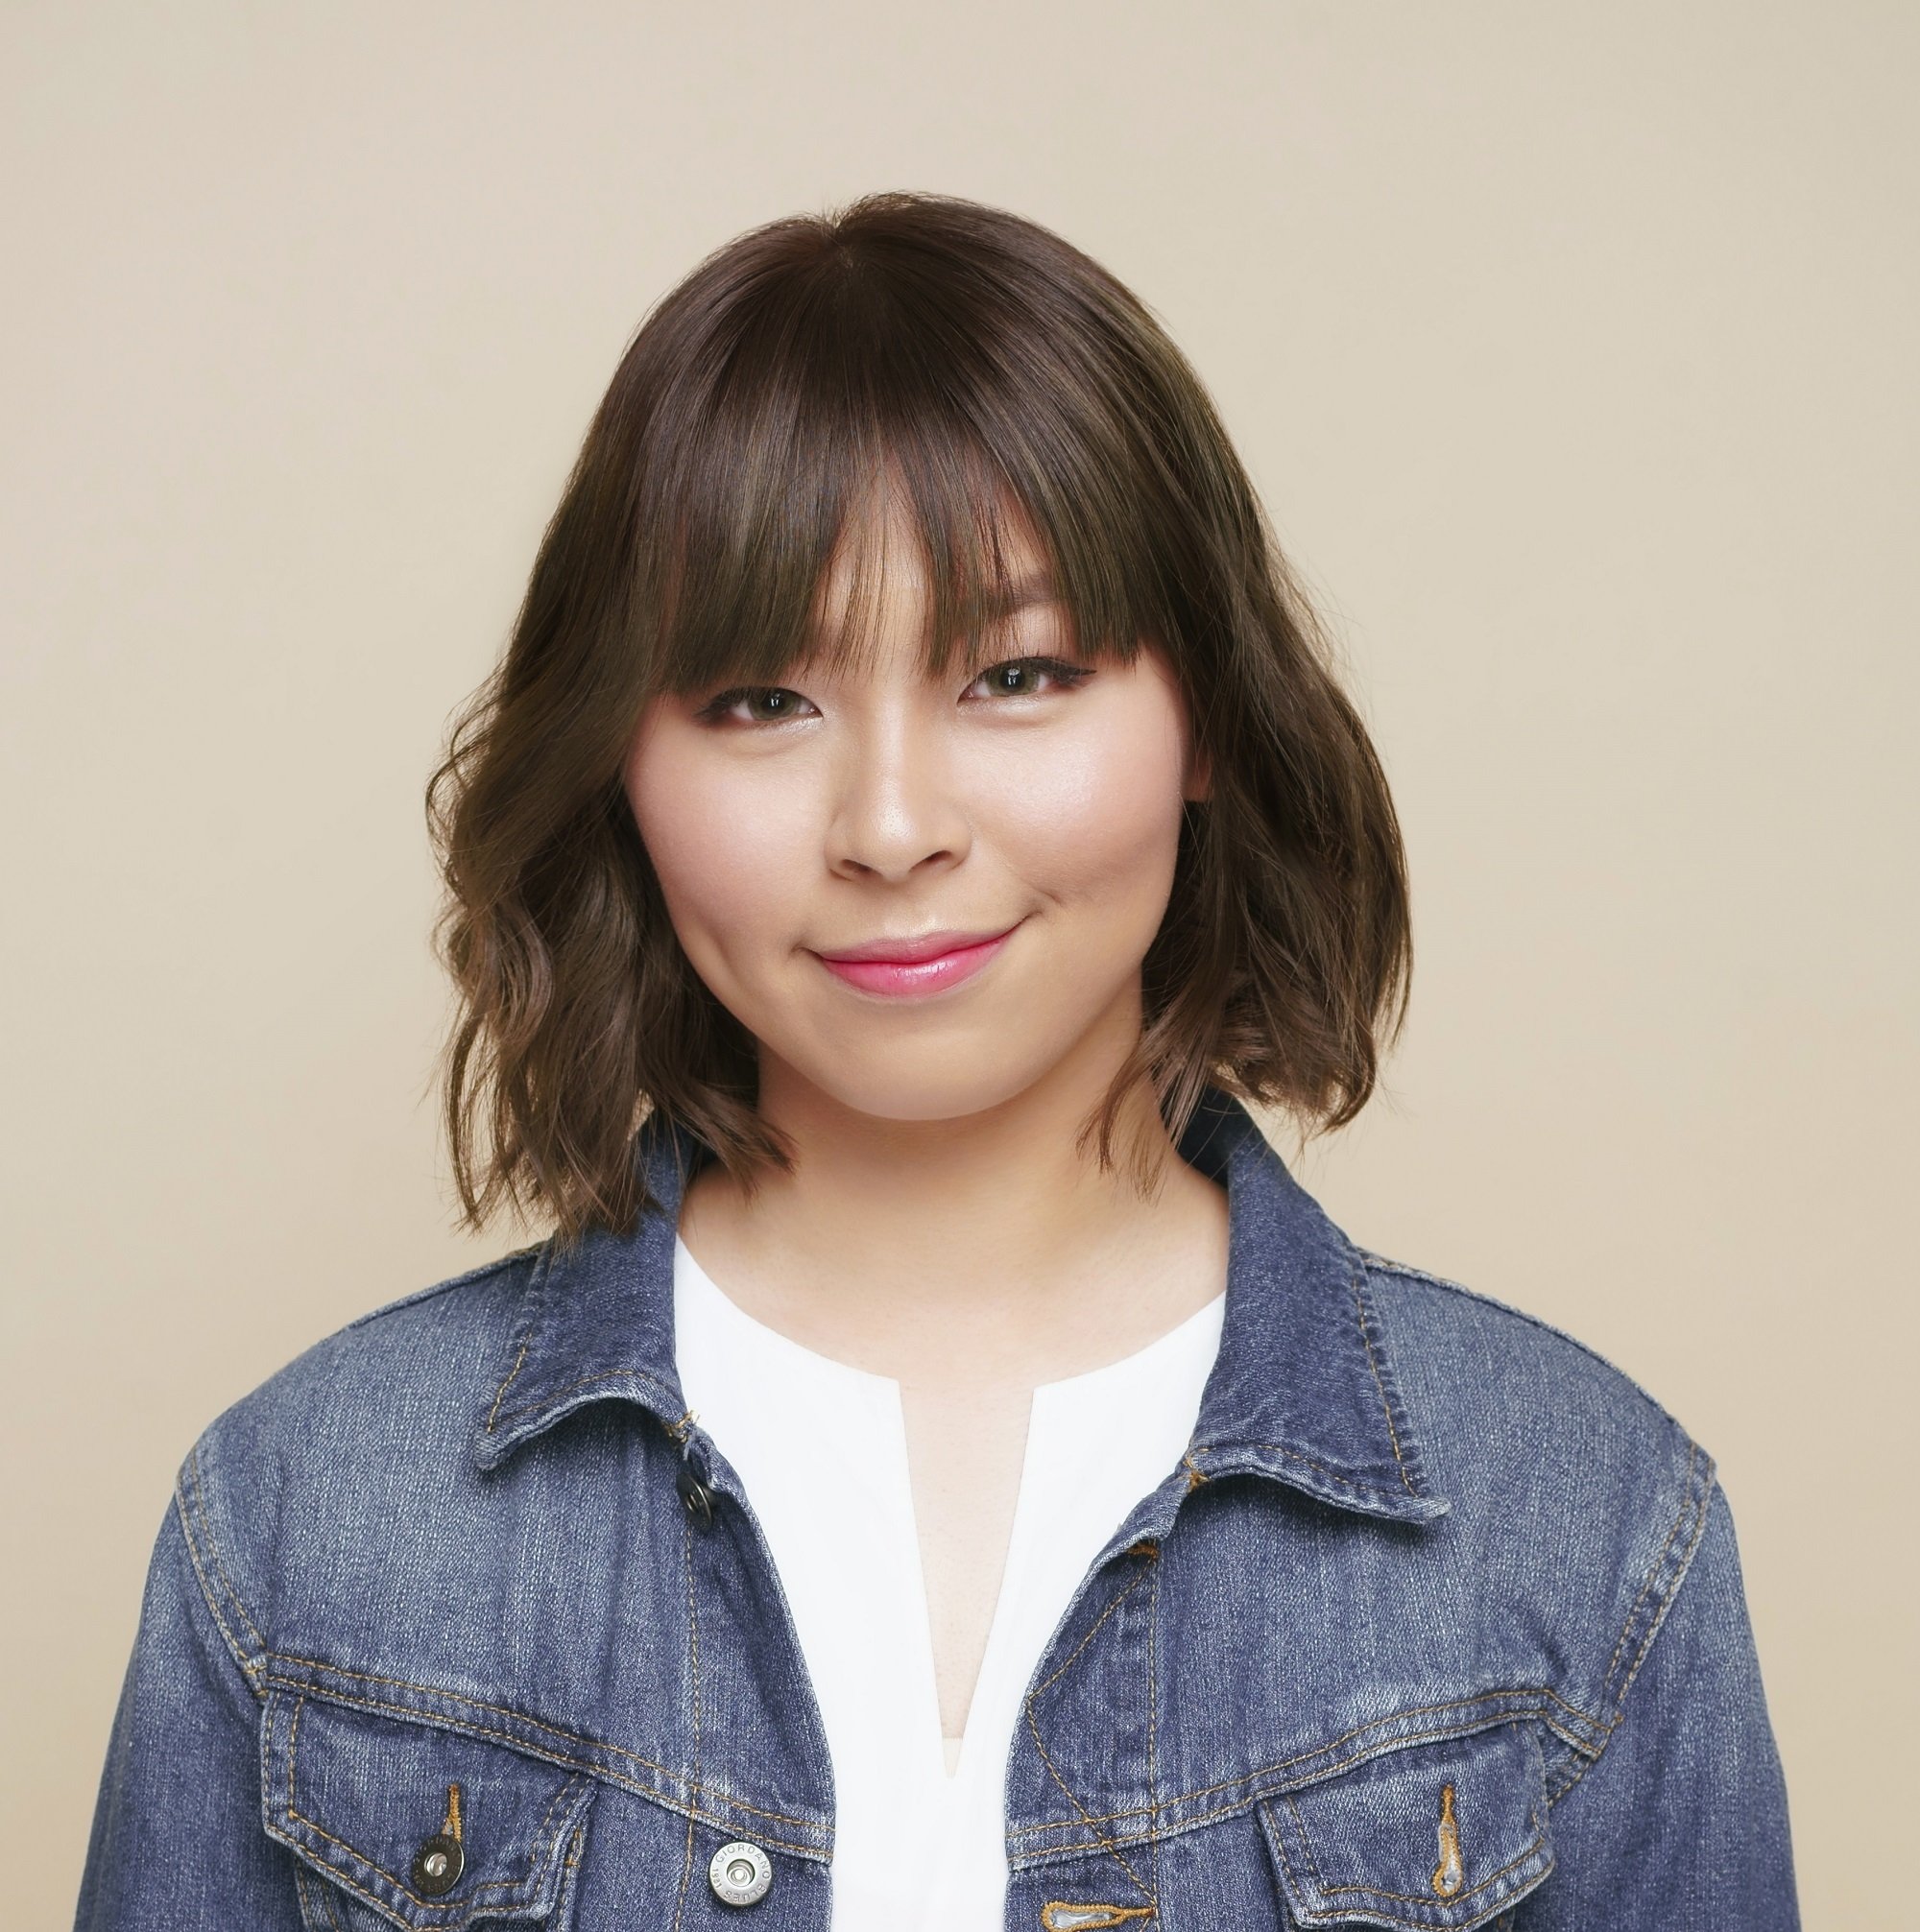 33 Amazing Asian Short Hair Ideas to Rock Before the Year Ends